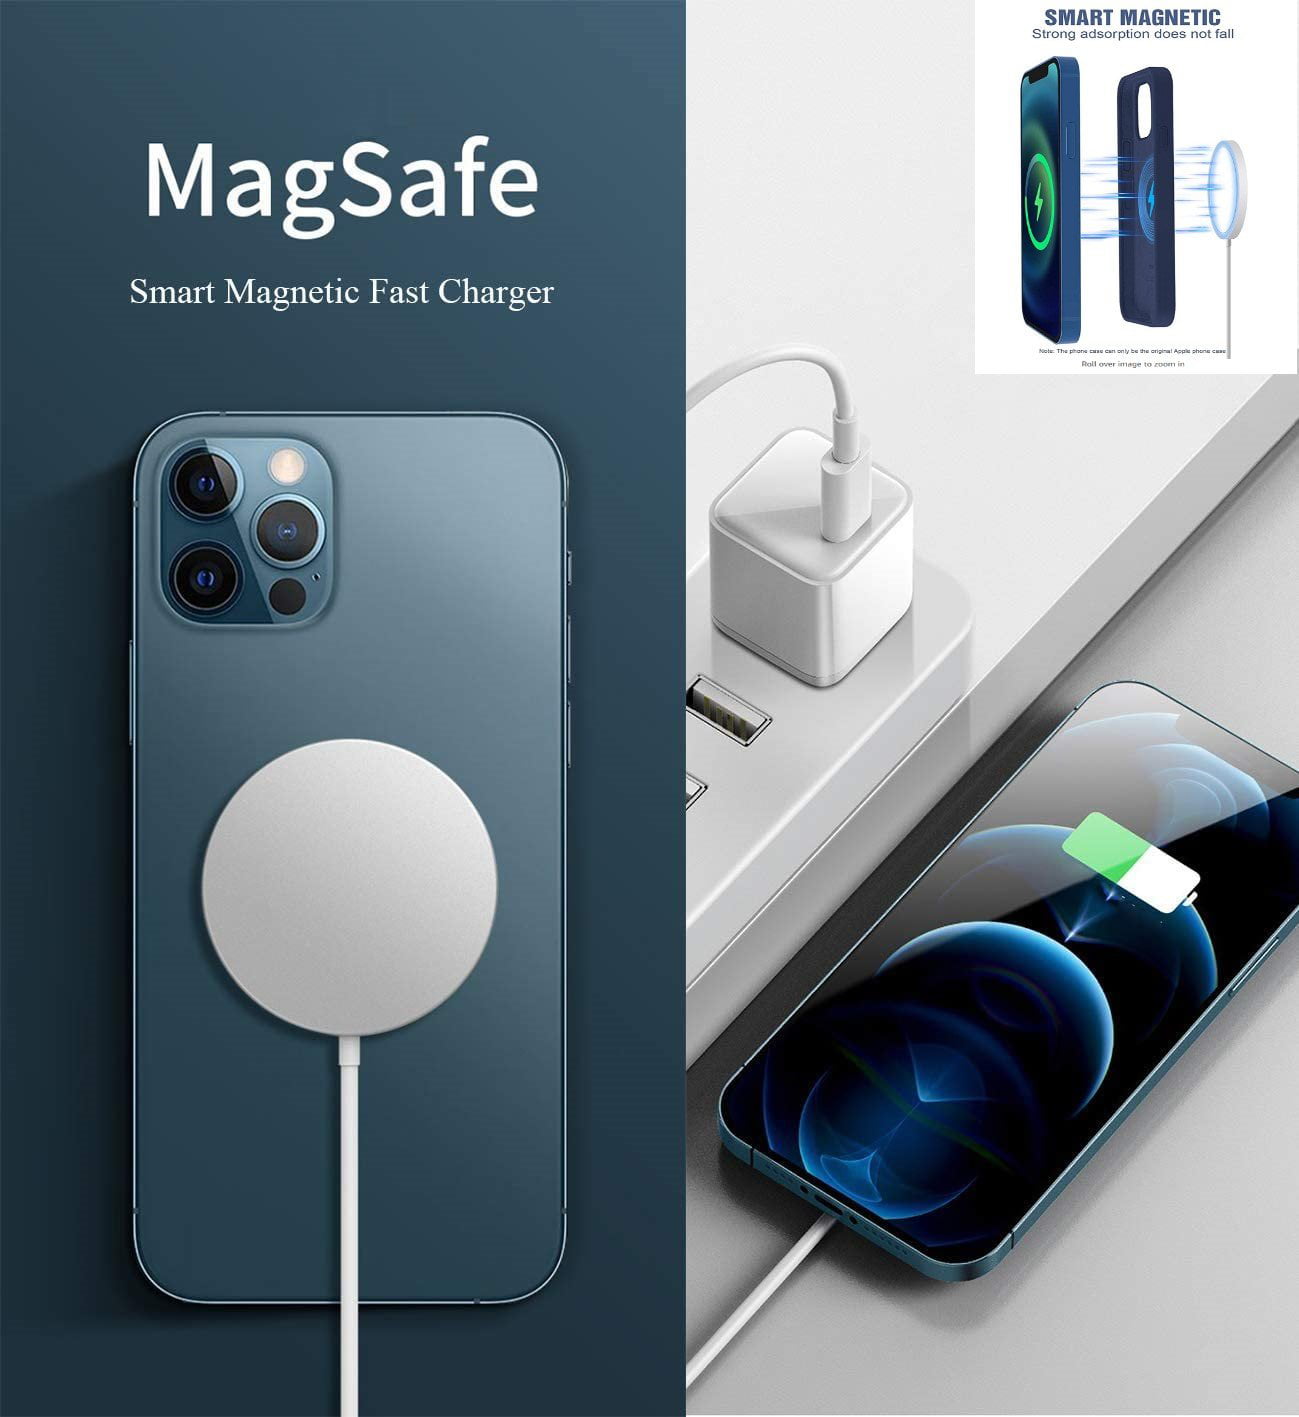 with USB-C 20W Adapter Fast Charging Pad for Samsung/LG/Google Phones Magnetic Wireless Charger for iPhone 12/12 Mini/12 Pro/ 12 Pro max and Apple AirPods 2 /pro 